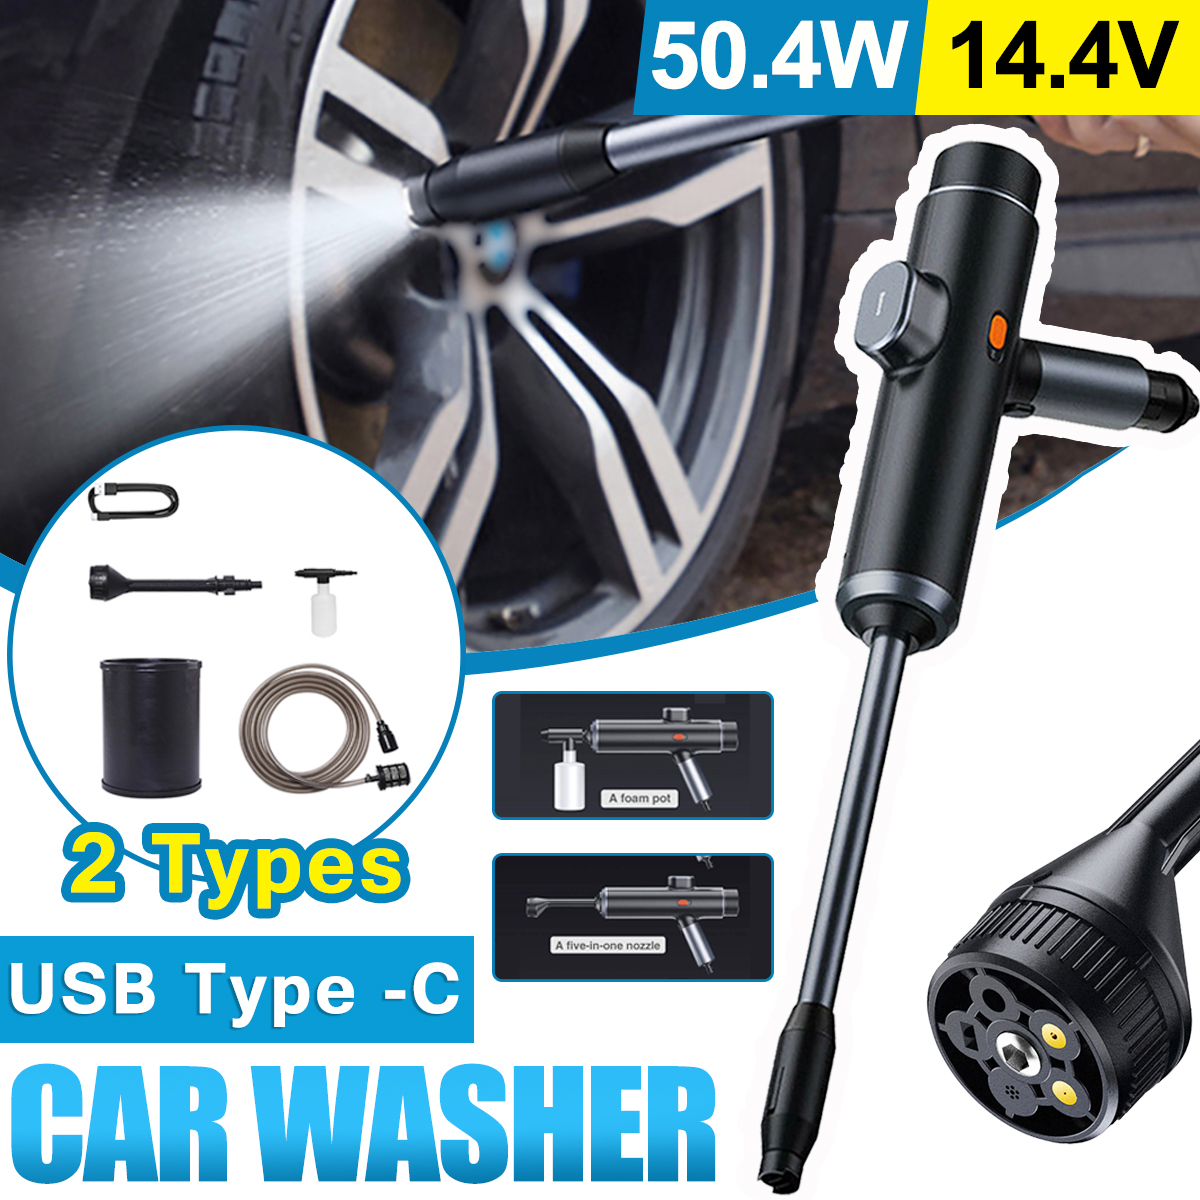 Display-Portable-Cordless-High-Pressure-Washer-Machine-USB-Rechargeable-Electric-Car-Washing-Water-S-1861681-1